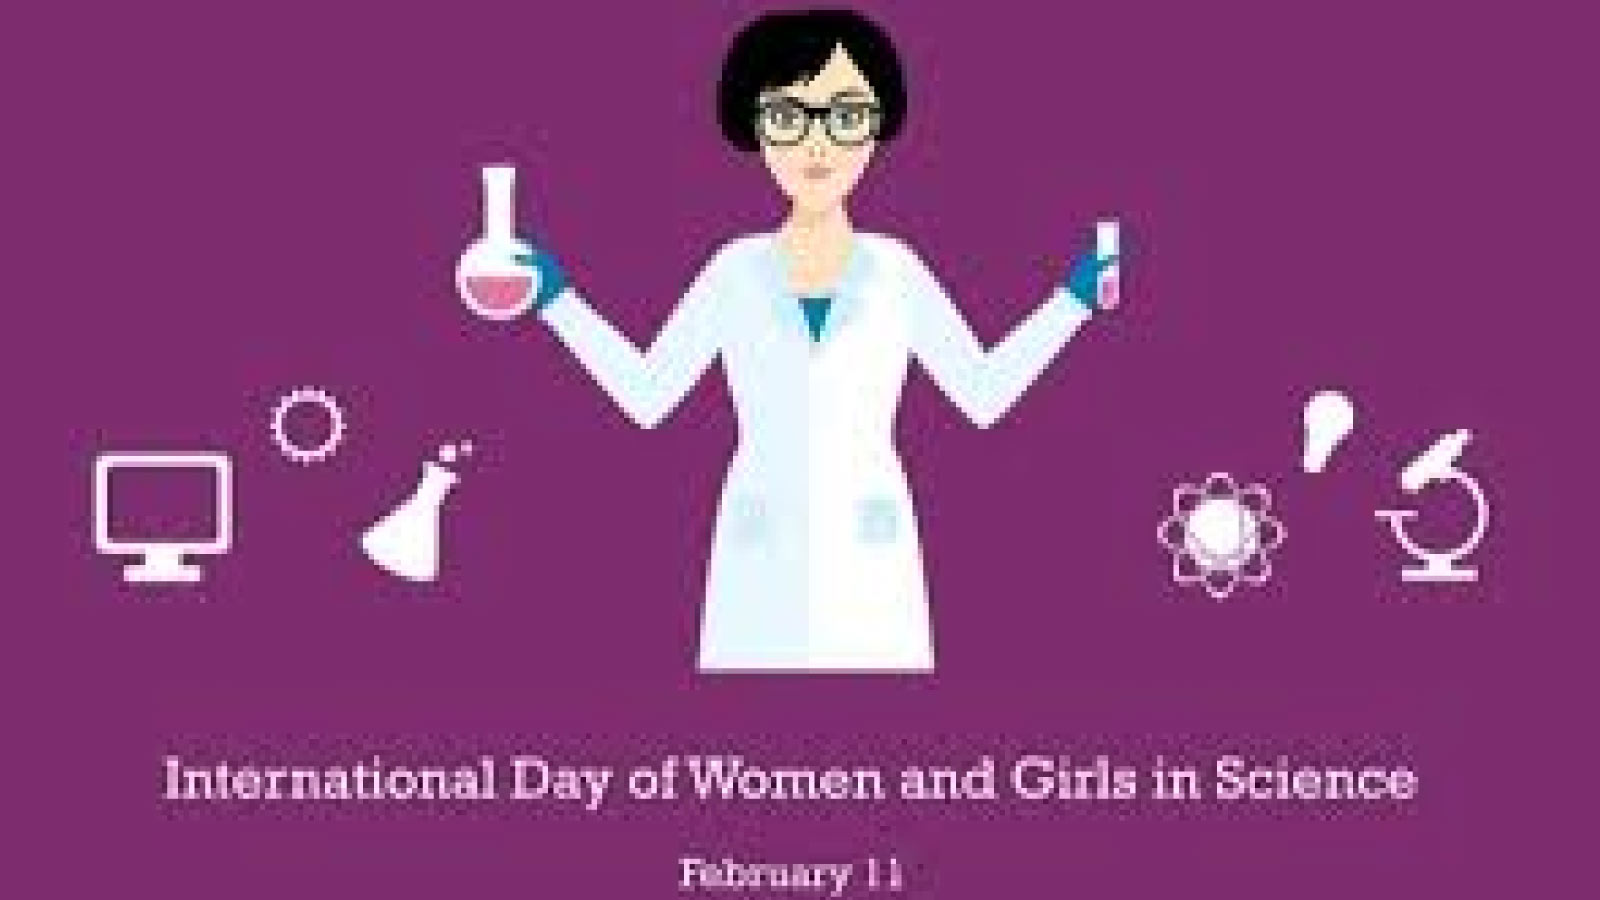 International Day of Women and Girls in Science11 February.